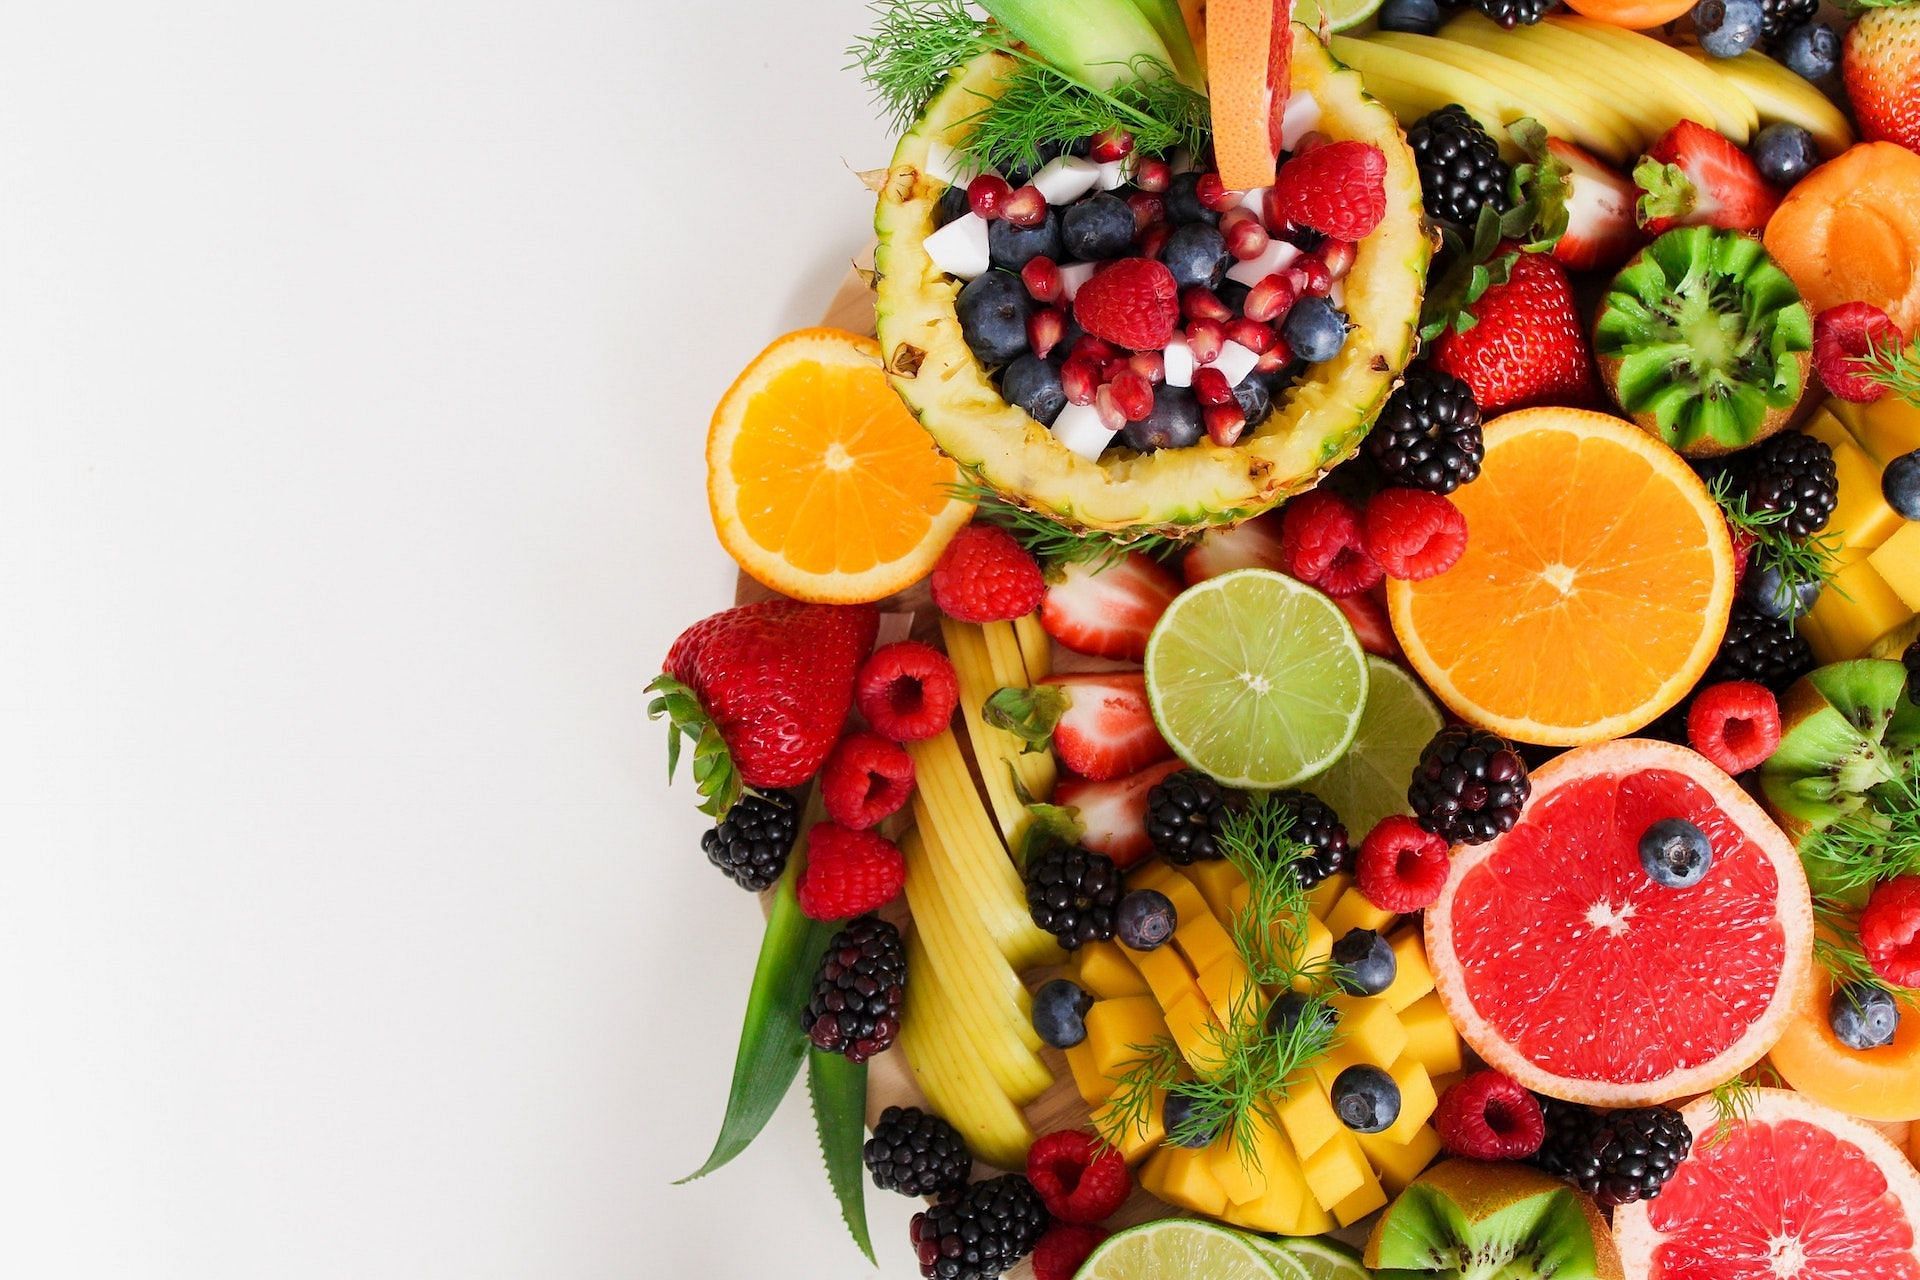 Fruits with a high glycemic index are not good for diabetes. (Photo via Pexels/Jane Doan)